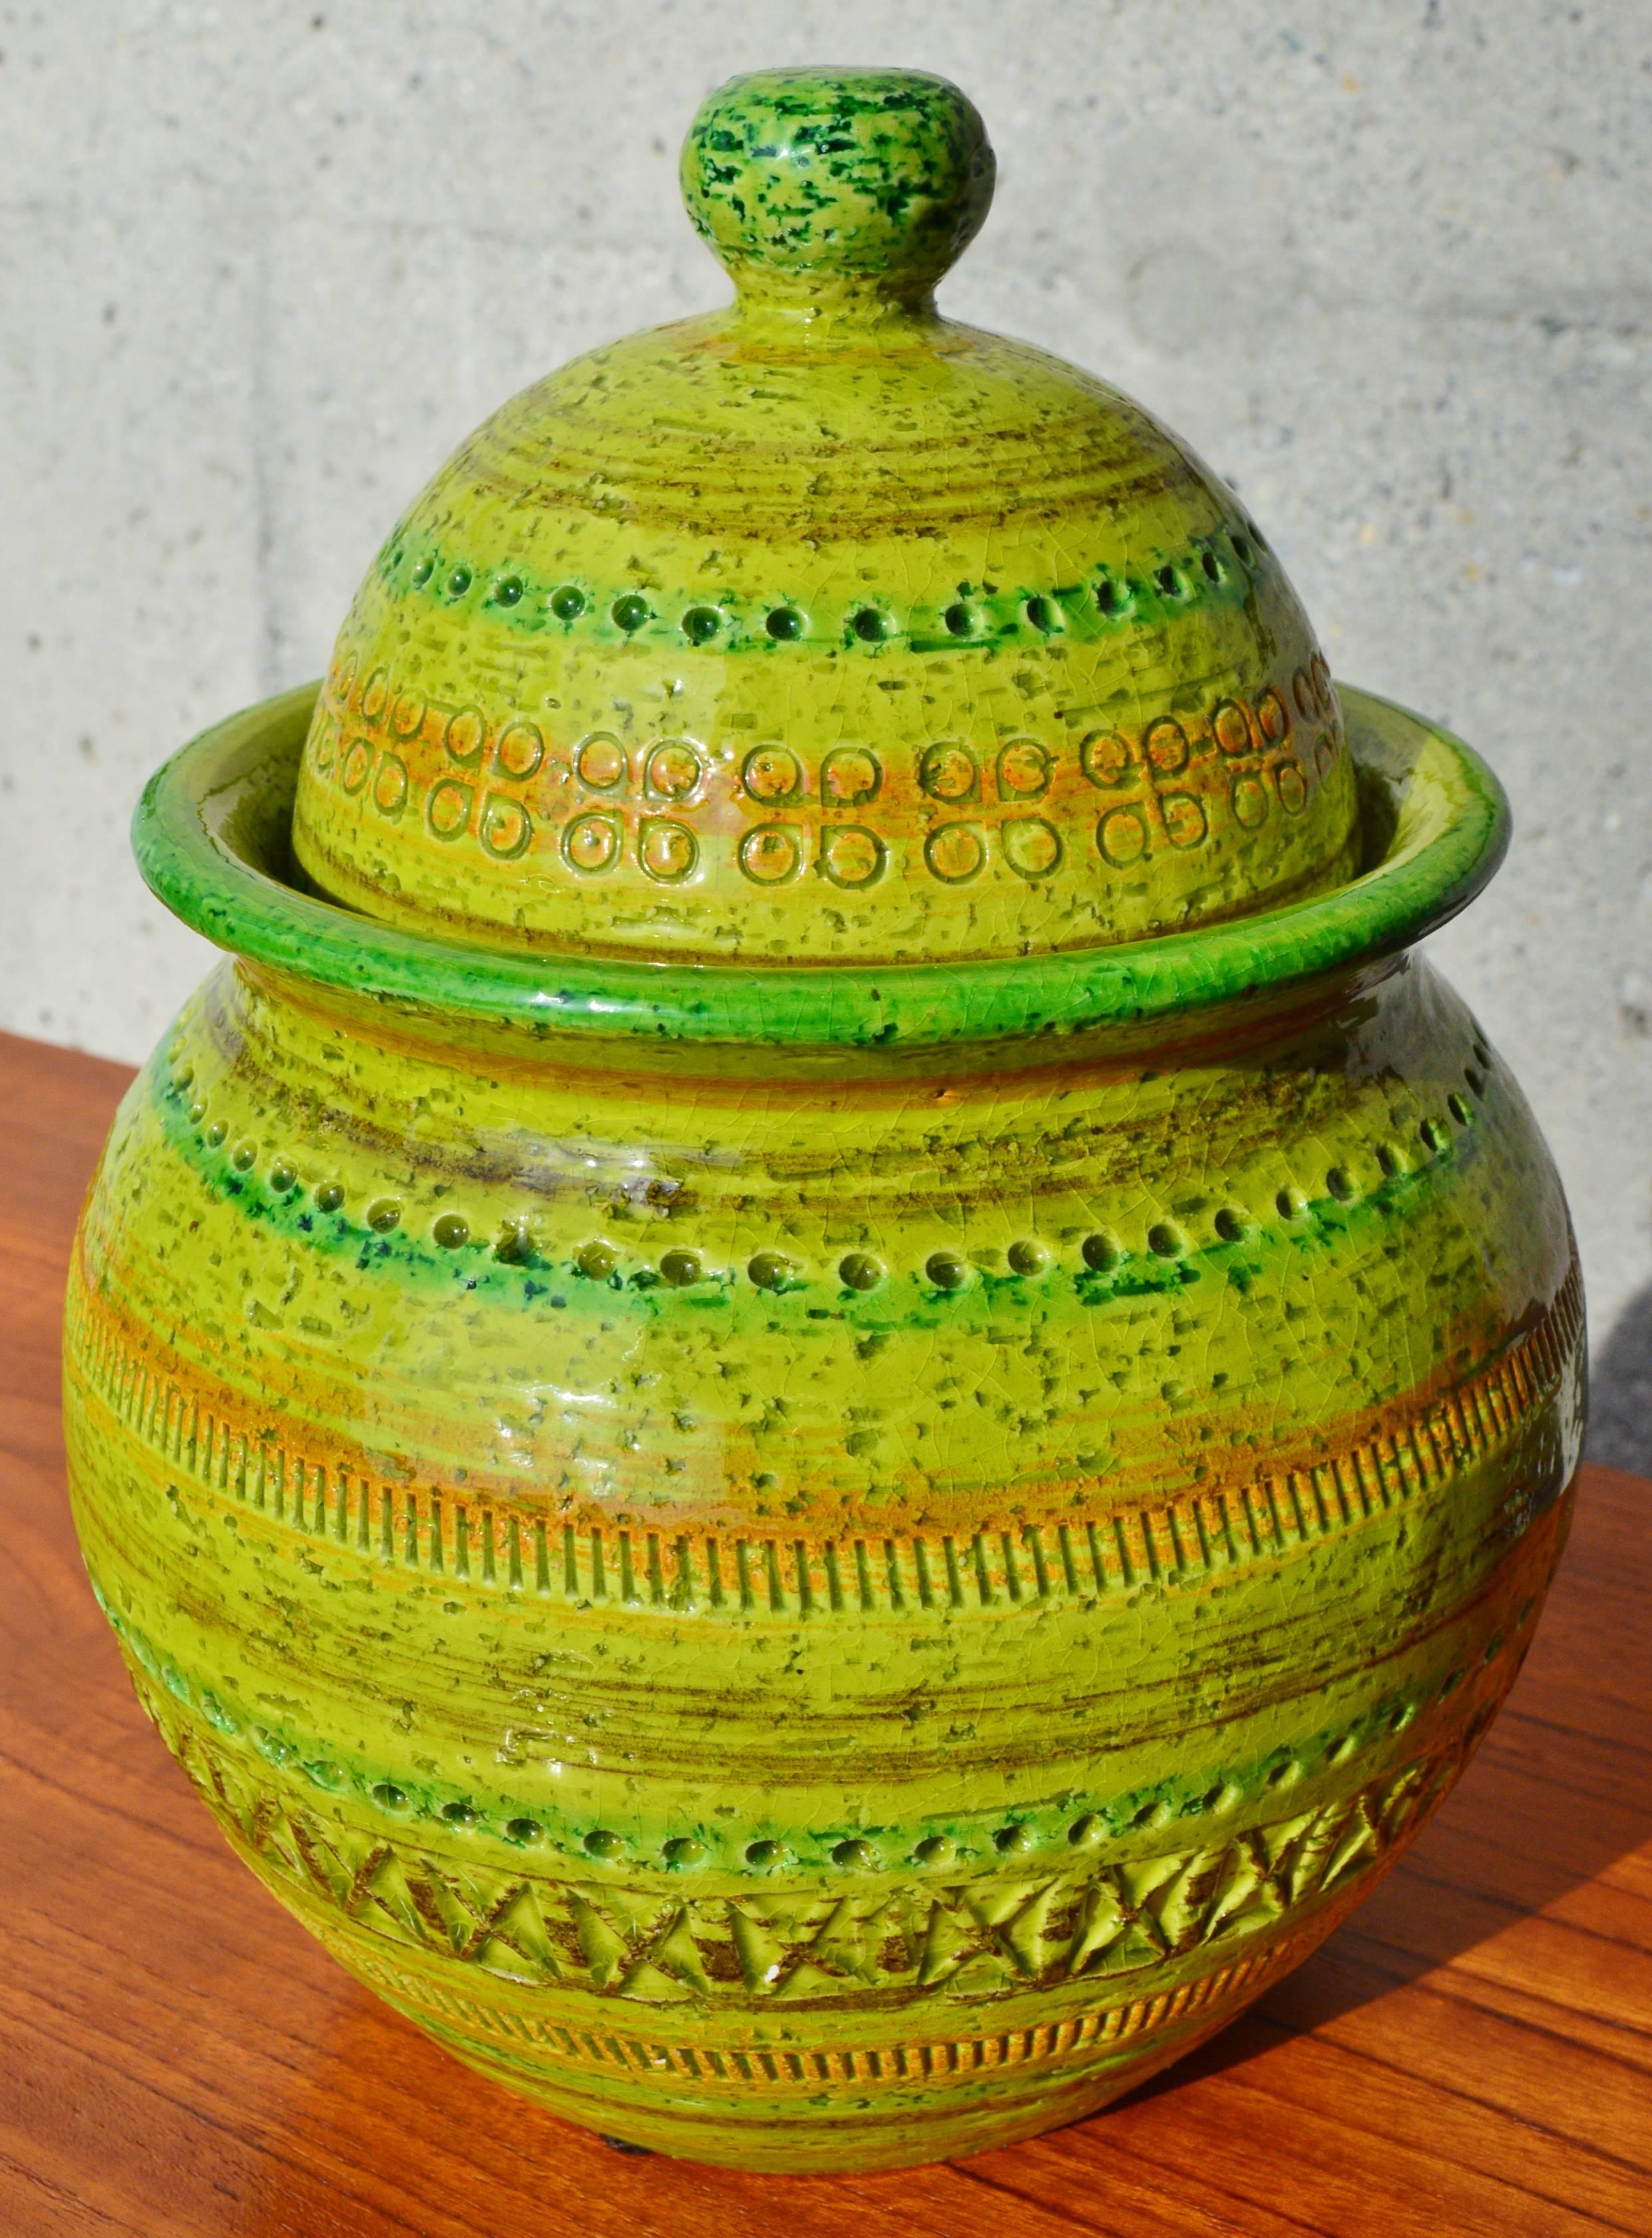 This stellar Bitossi ceramic lidded jar is in awesome shades of green with a touch of orange. The squat base is echoed by the shape of the lid. Striking piece for a pop in your decor. The only flaw is a small chip on the lid base where it is